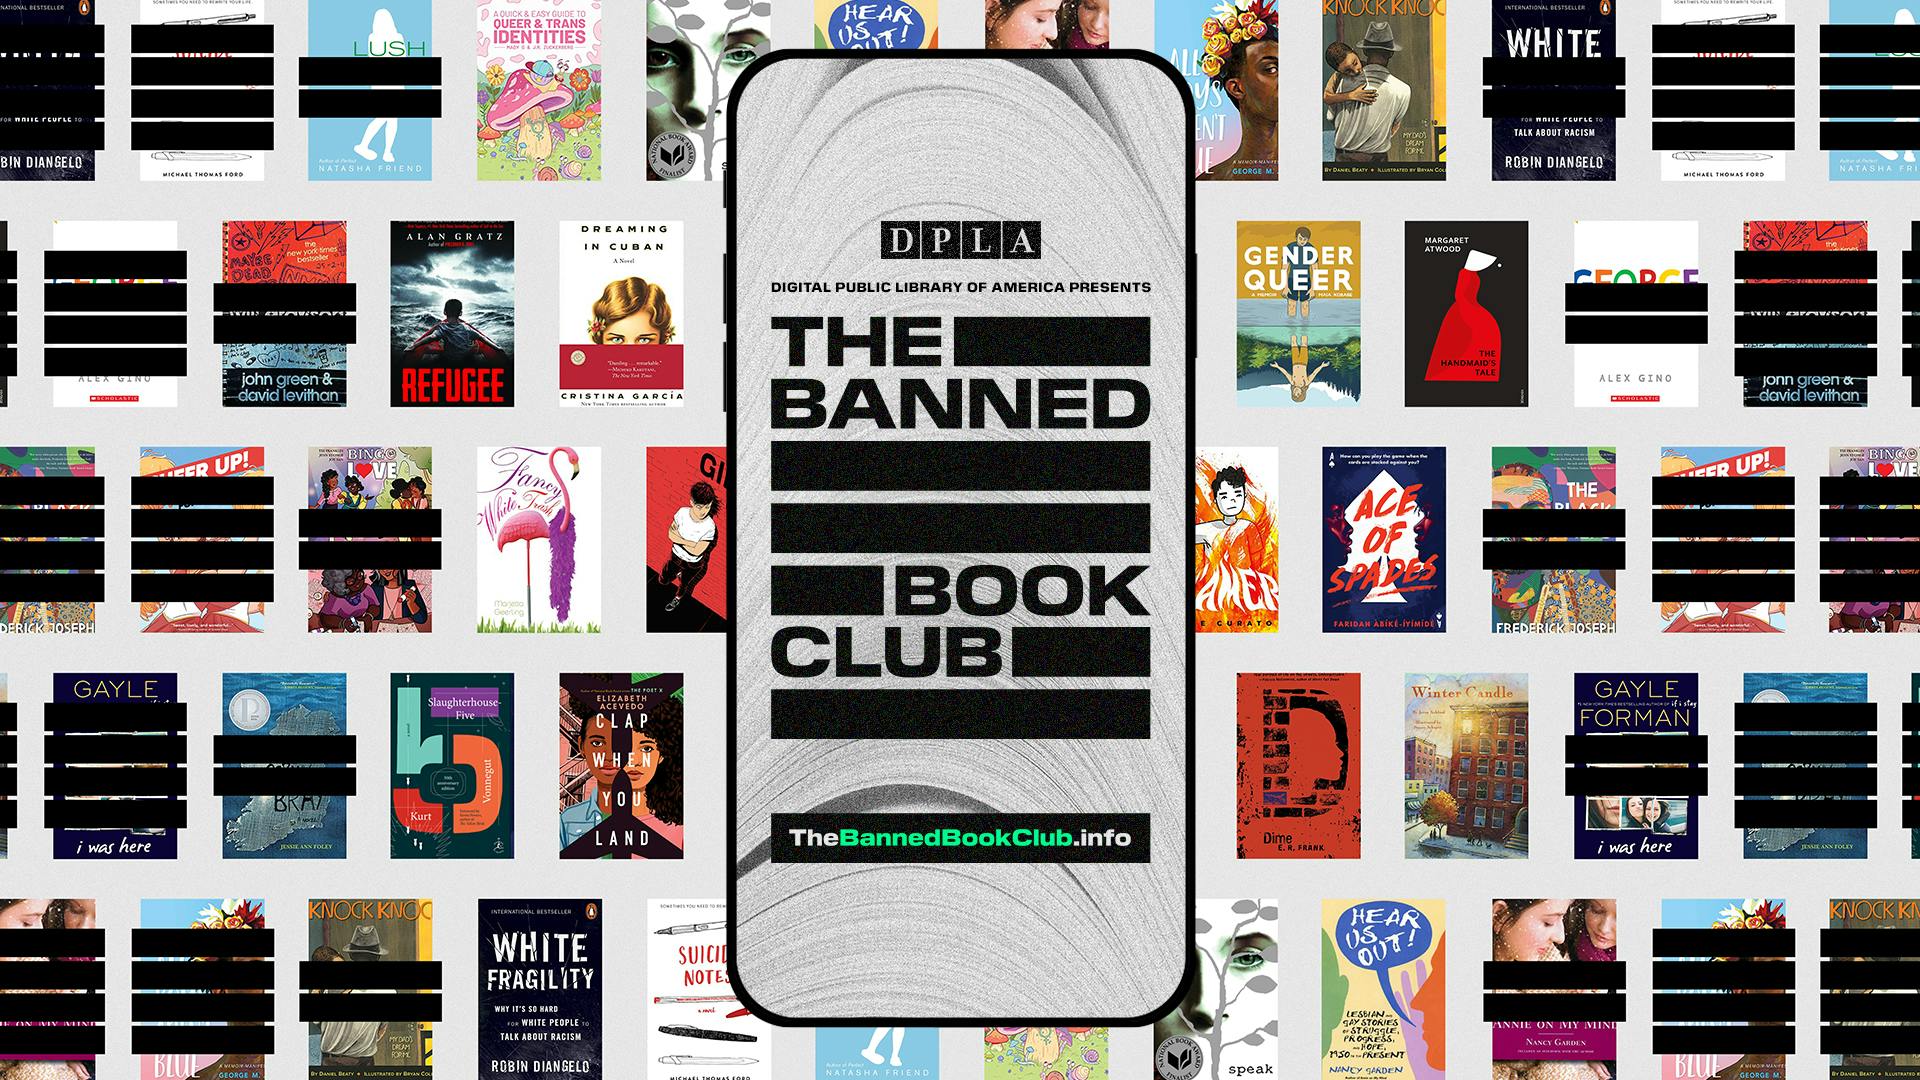 Graphic of a smartphone with the Banned Book Club logo, which features thick black lines like redacted text, with rows of book covers in the background